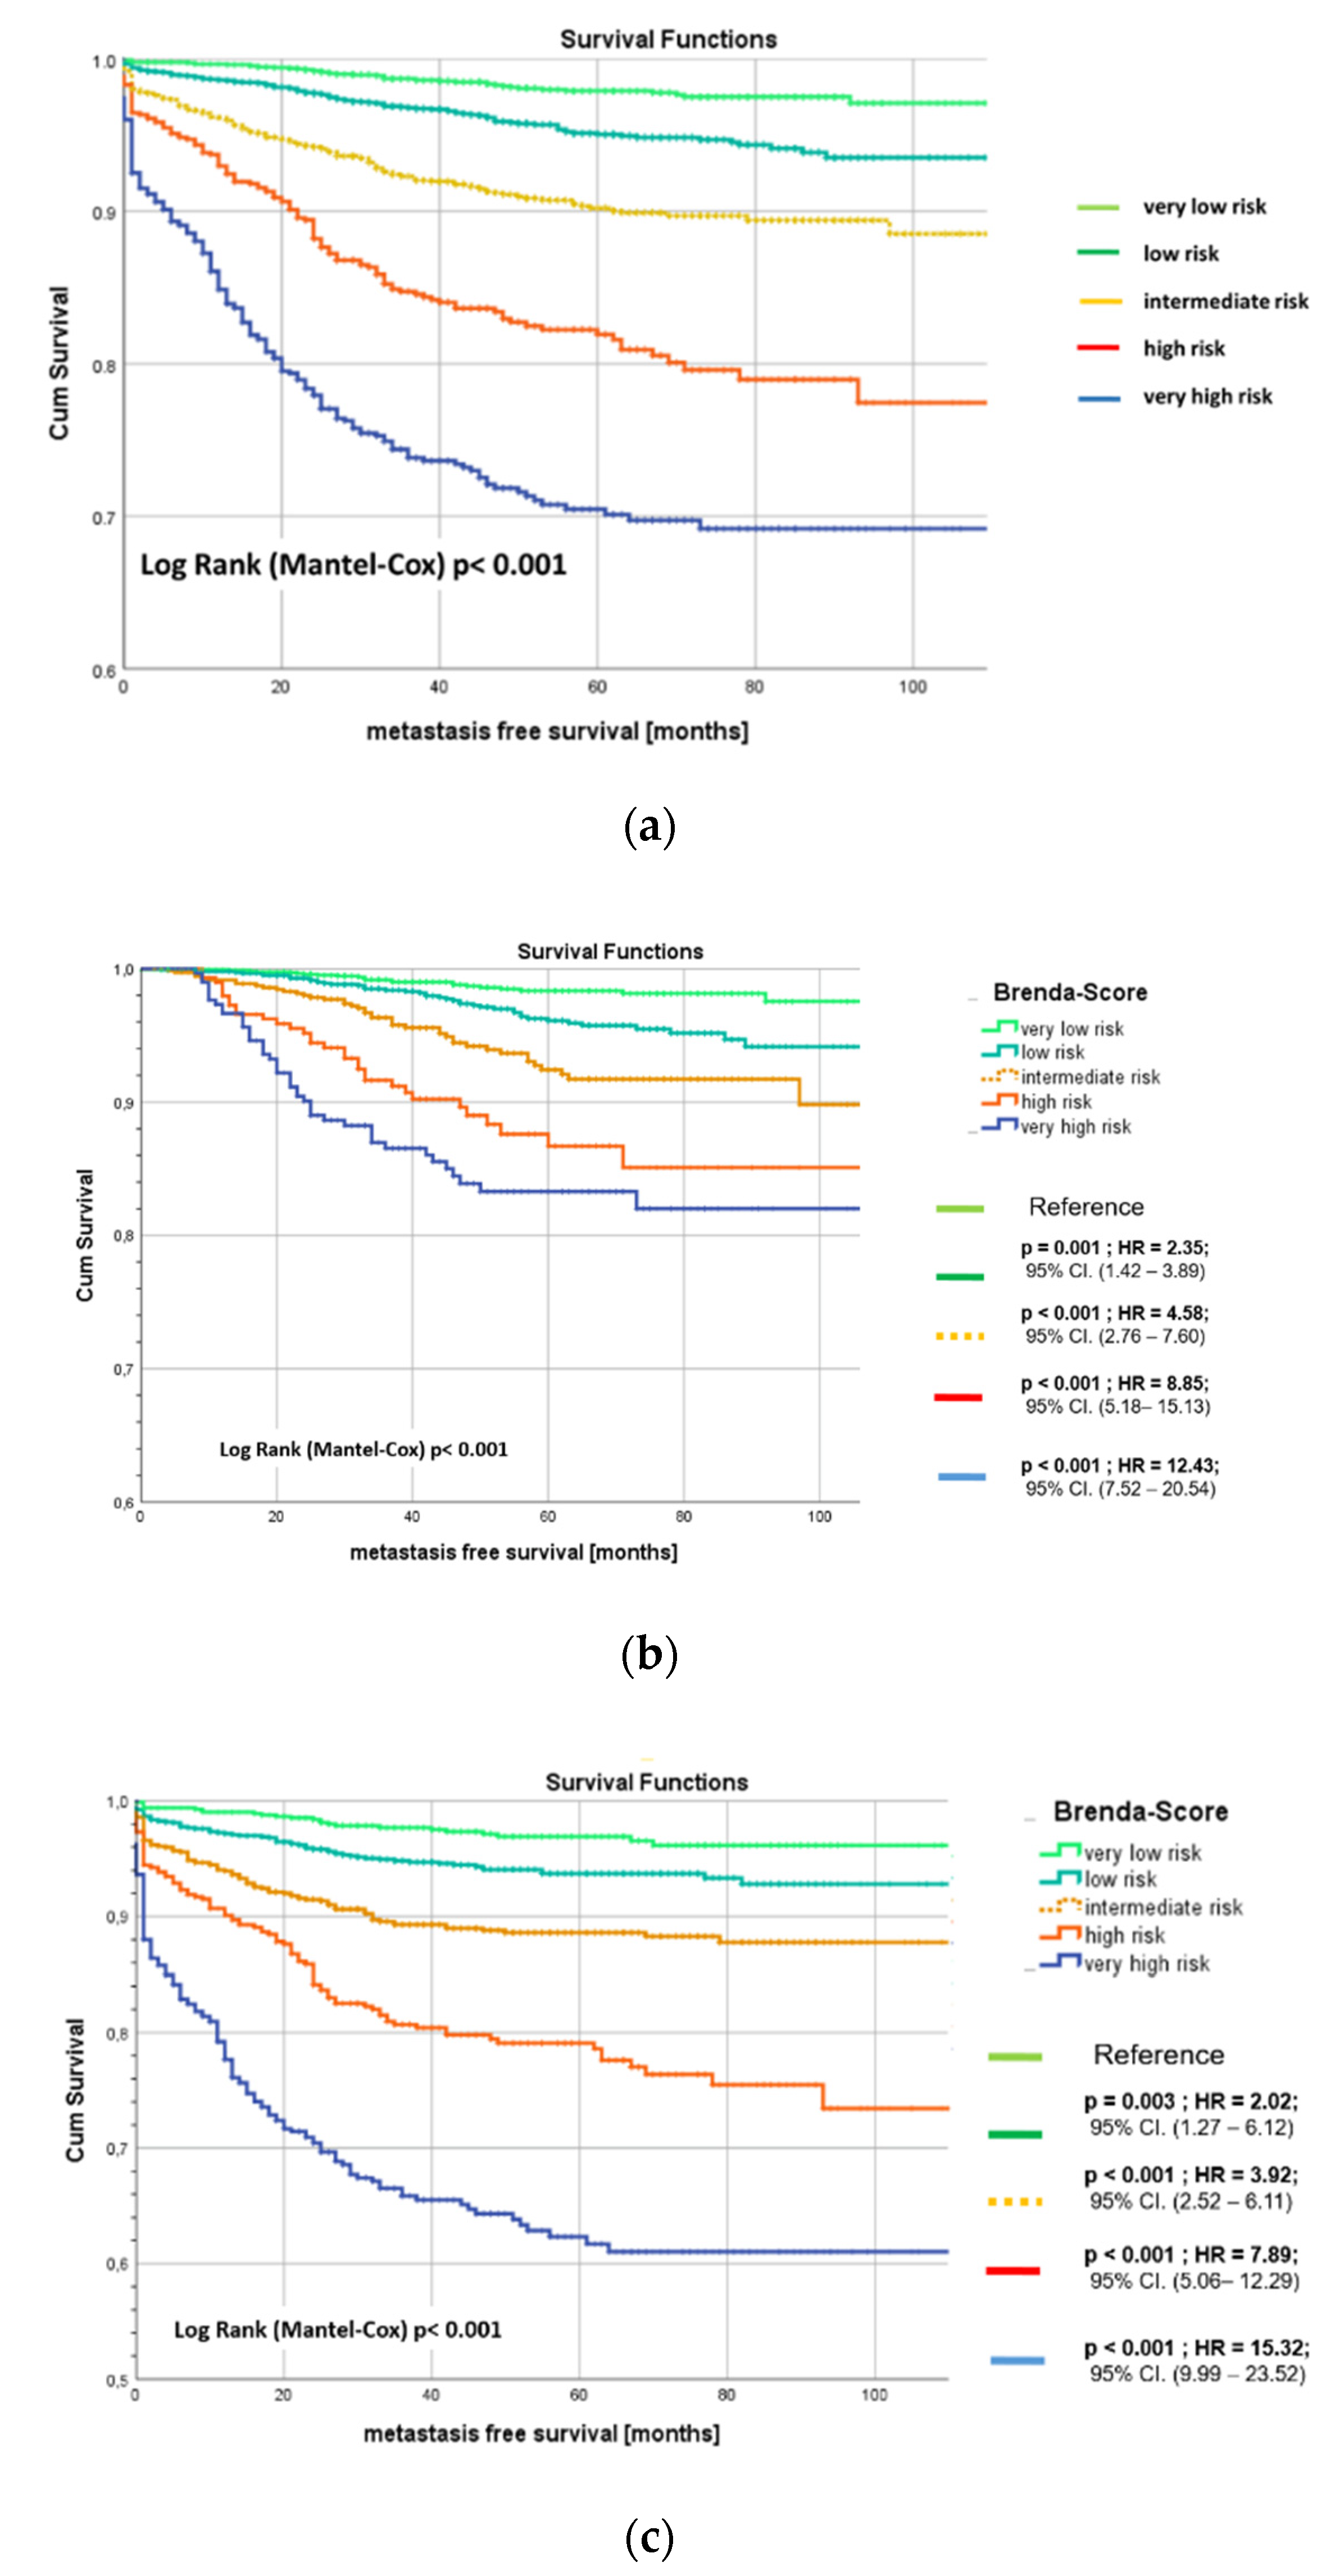 Cancers | Free Full-Text | BRENDA-Score, a Highly Significant, Internally  and Externally Validated Prognostic Marker for Metastatic Recurrence:  Analysis of 10,449 Primary Breast Cancer Patients